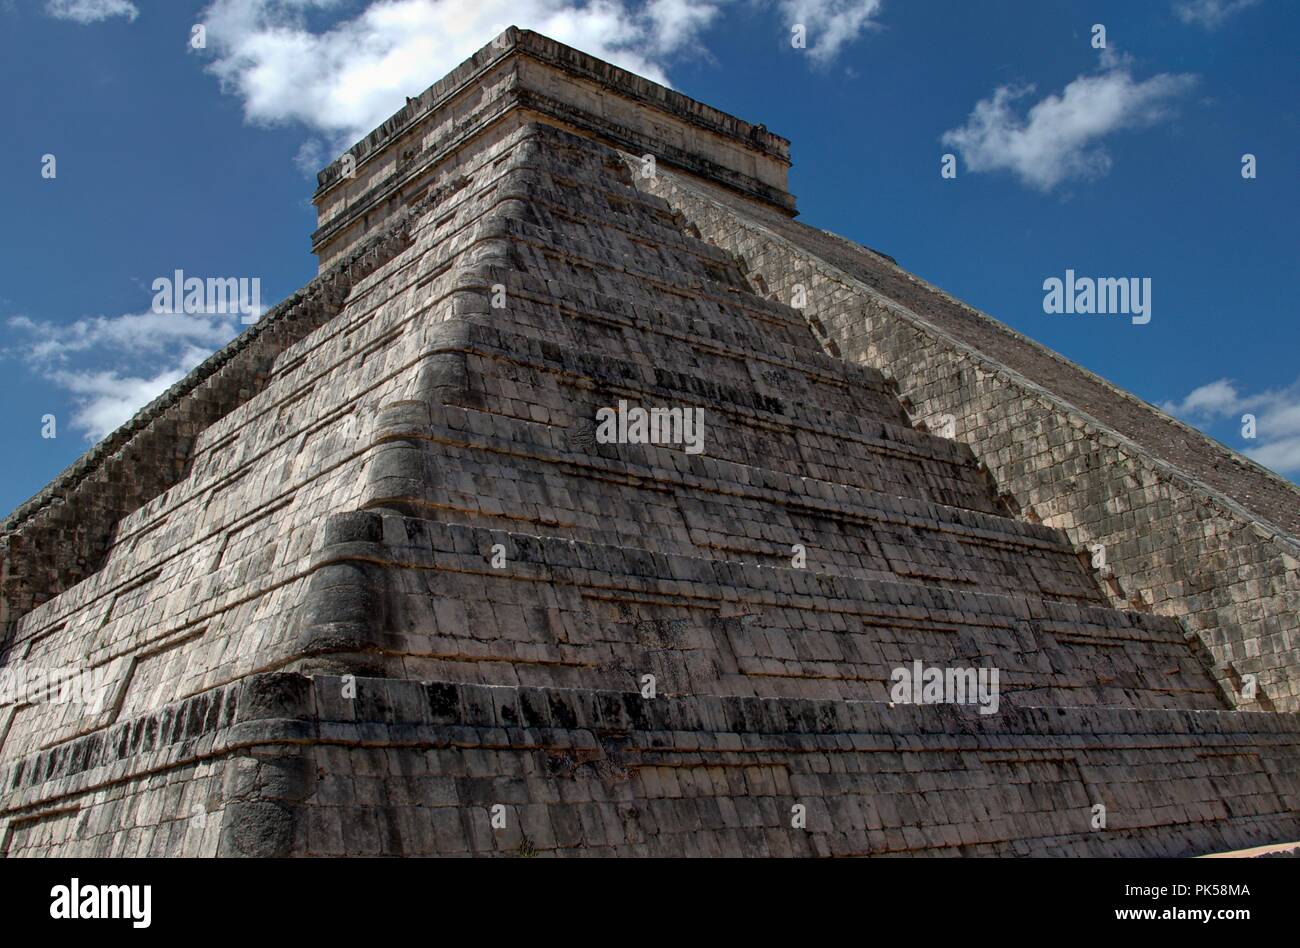 Ritual shaman temple in Mexico used for human sacrifice and worship. Ancient Mayan civilization stone structure. Stock Photo